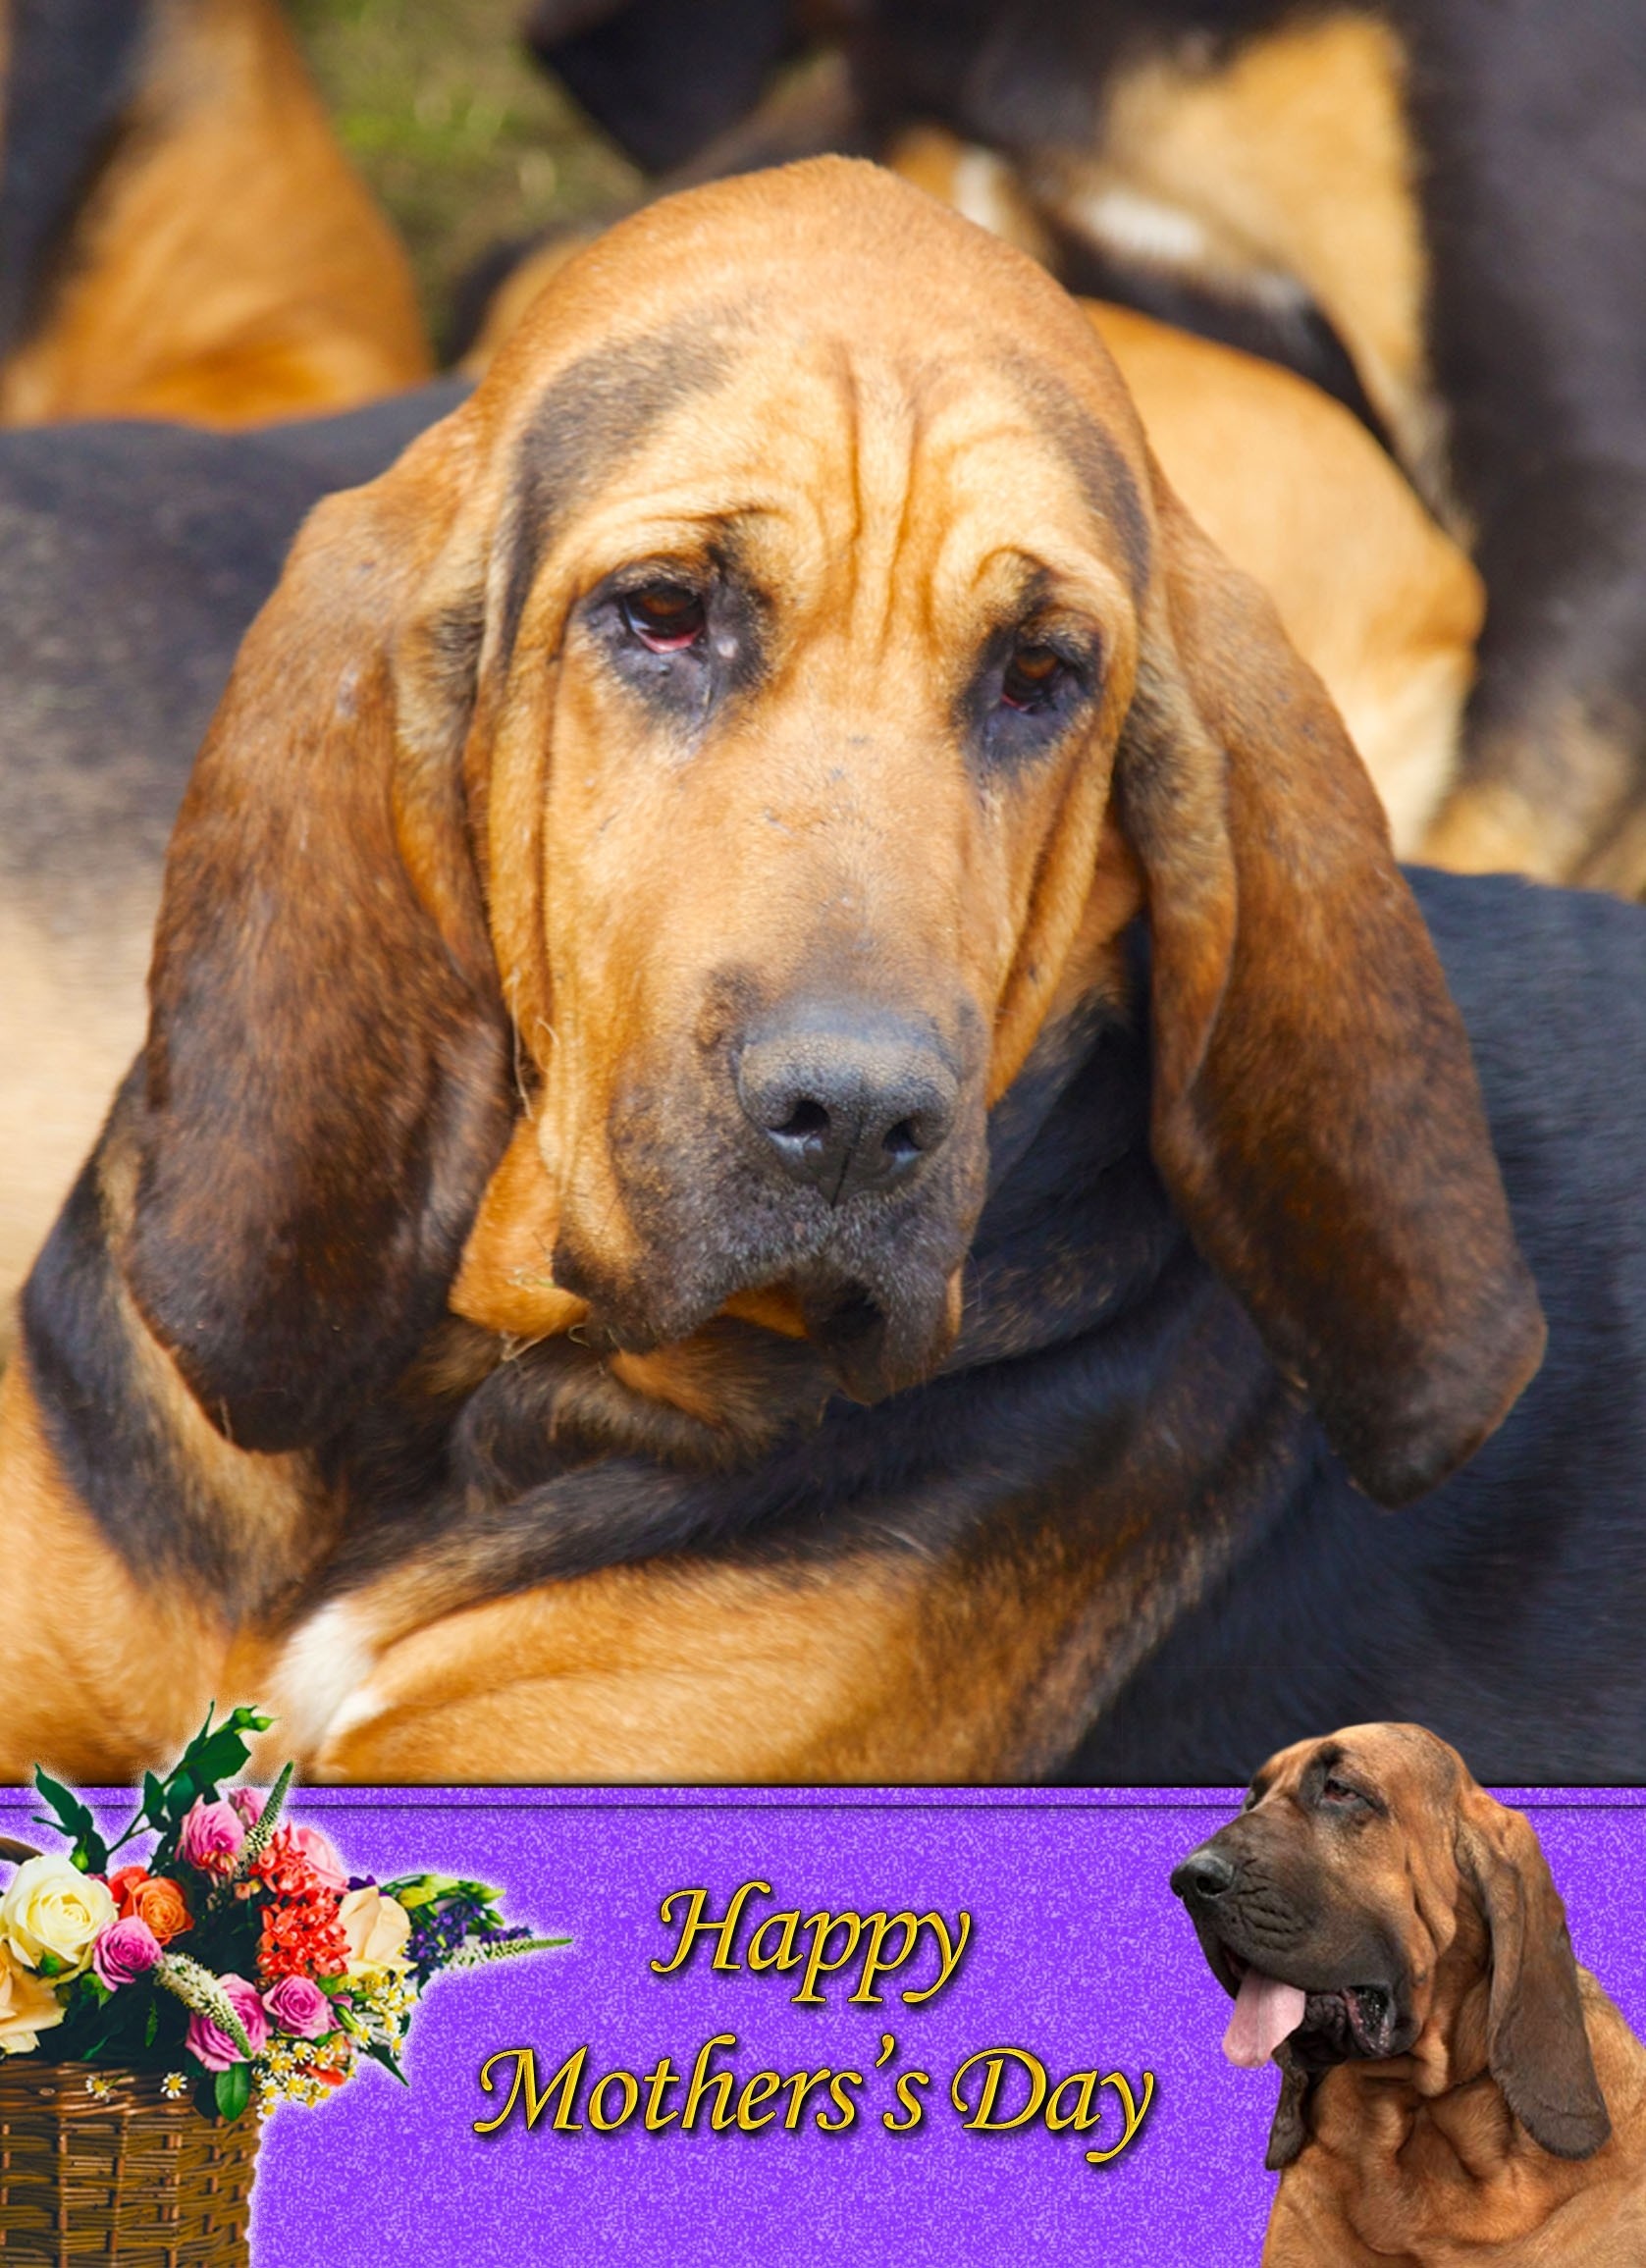 Bloodhound Mother's Day Card